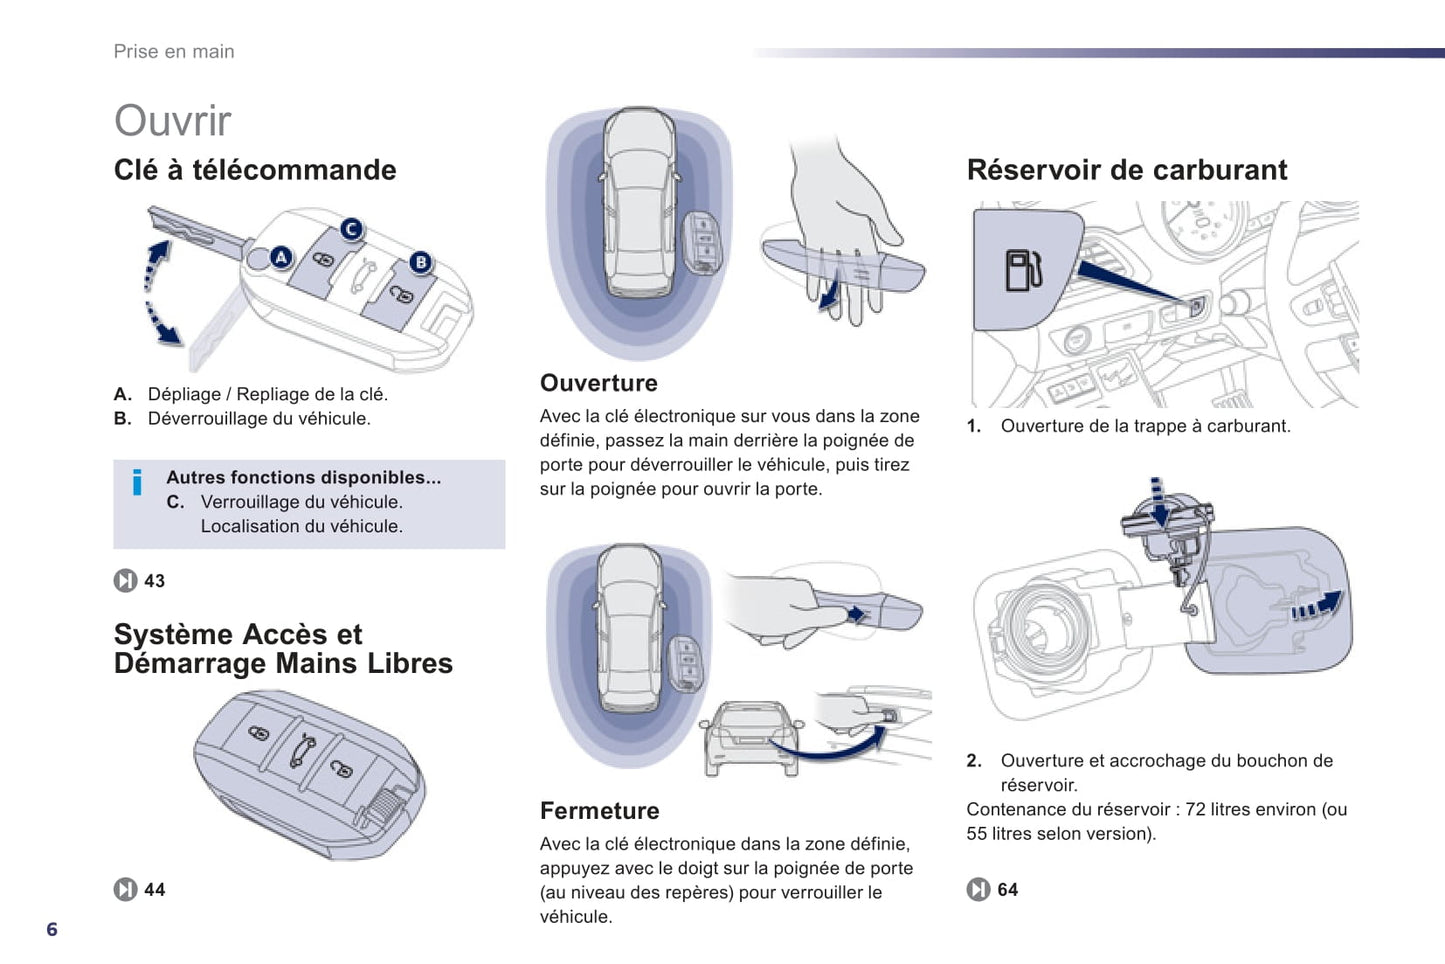 2012-2014 Peugeot 508 Owner's Manual | French